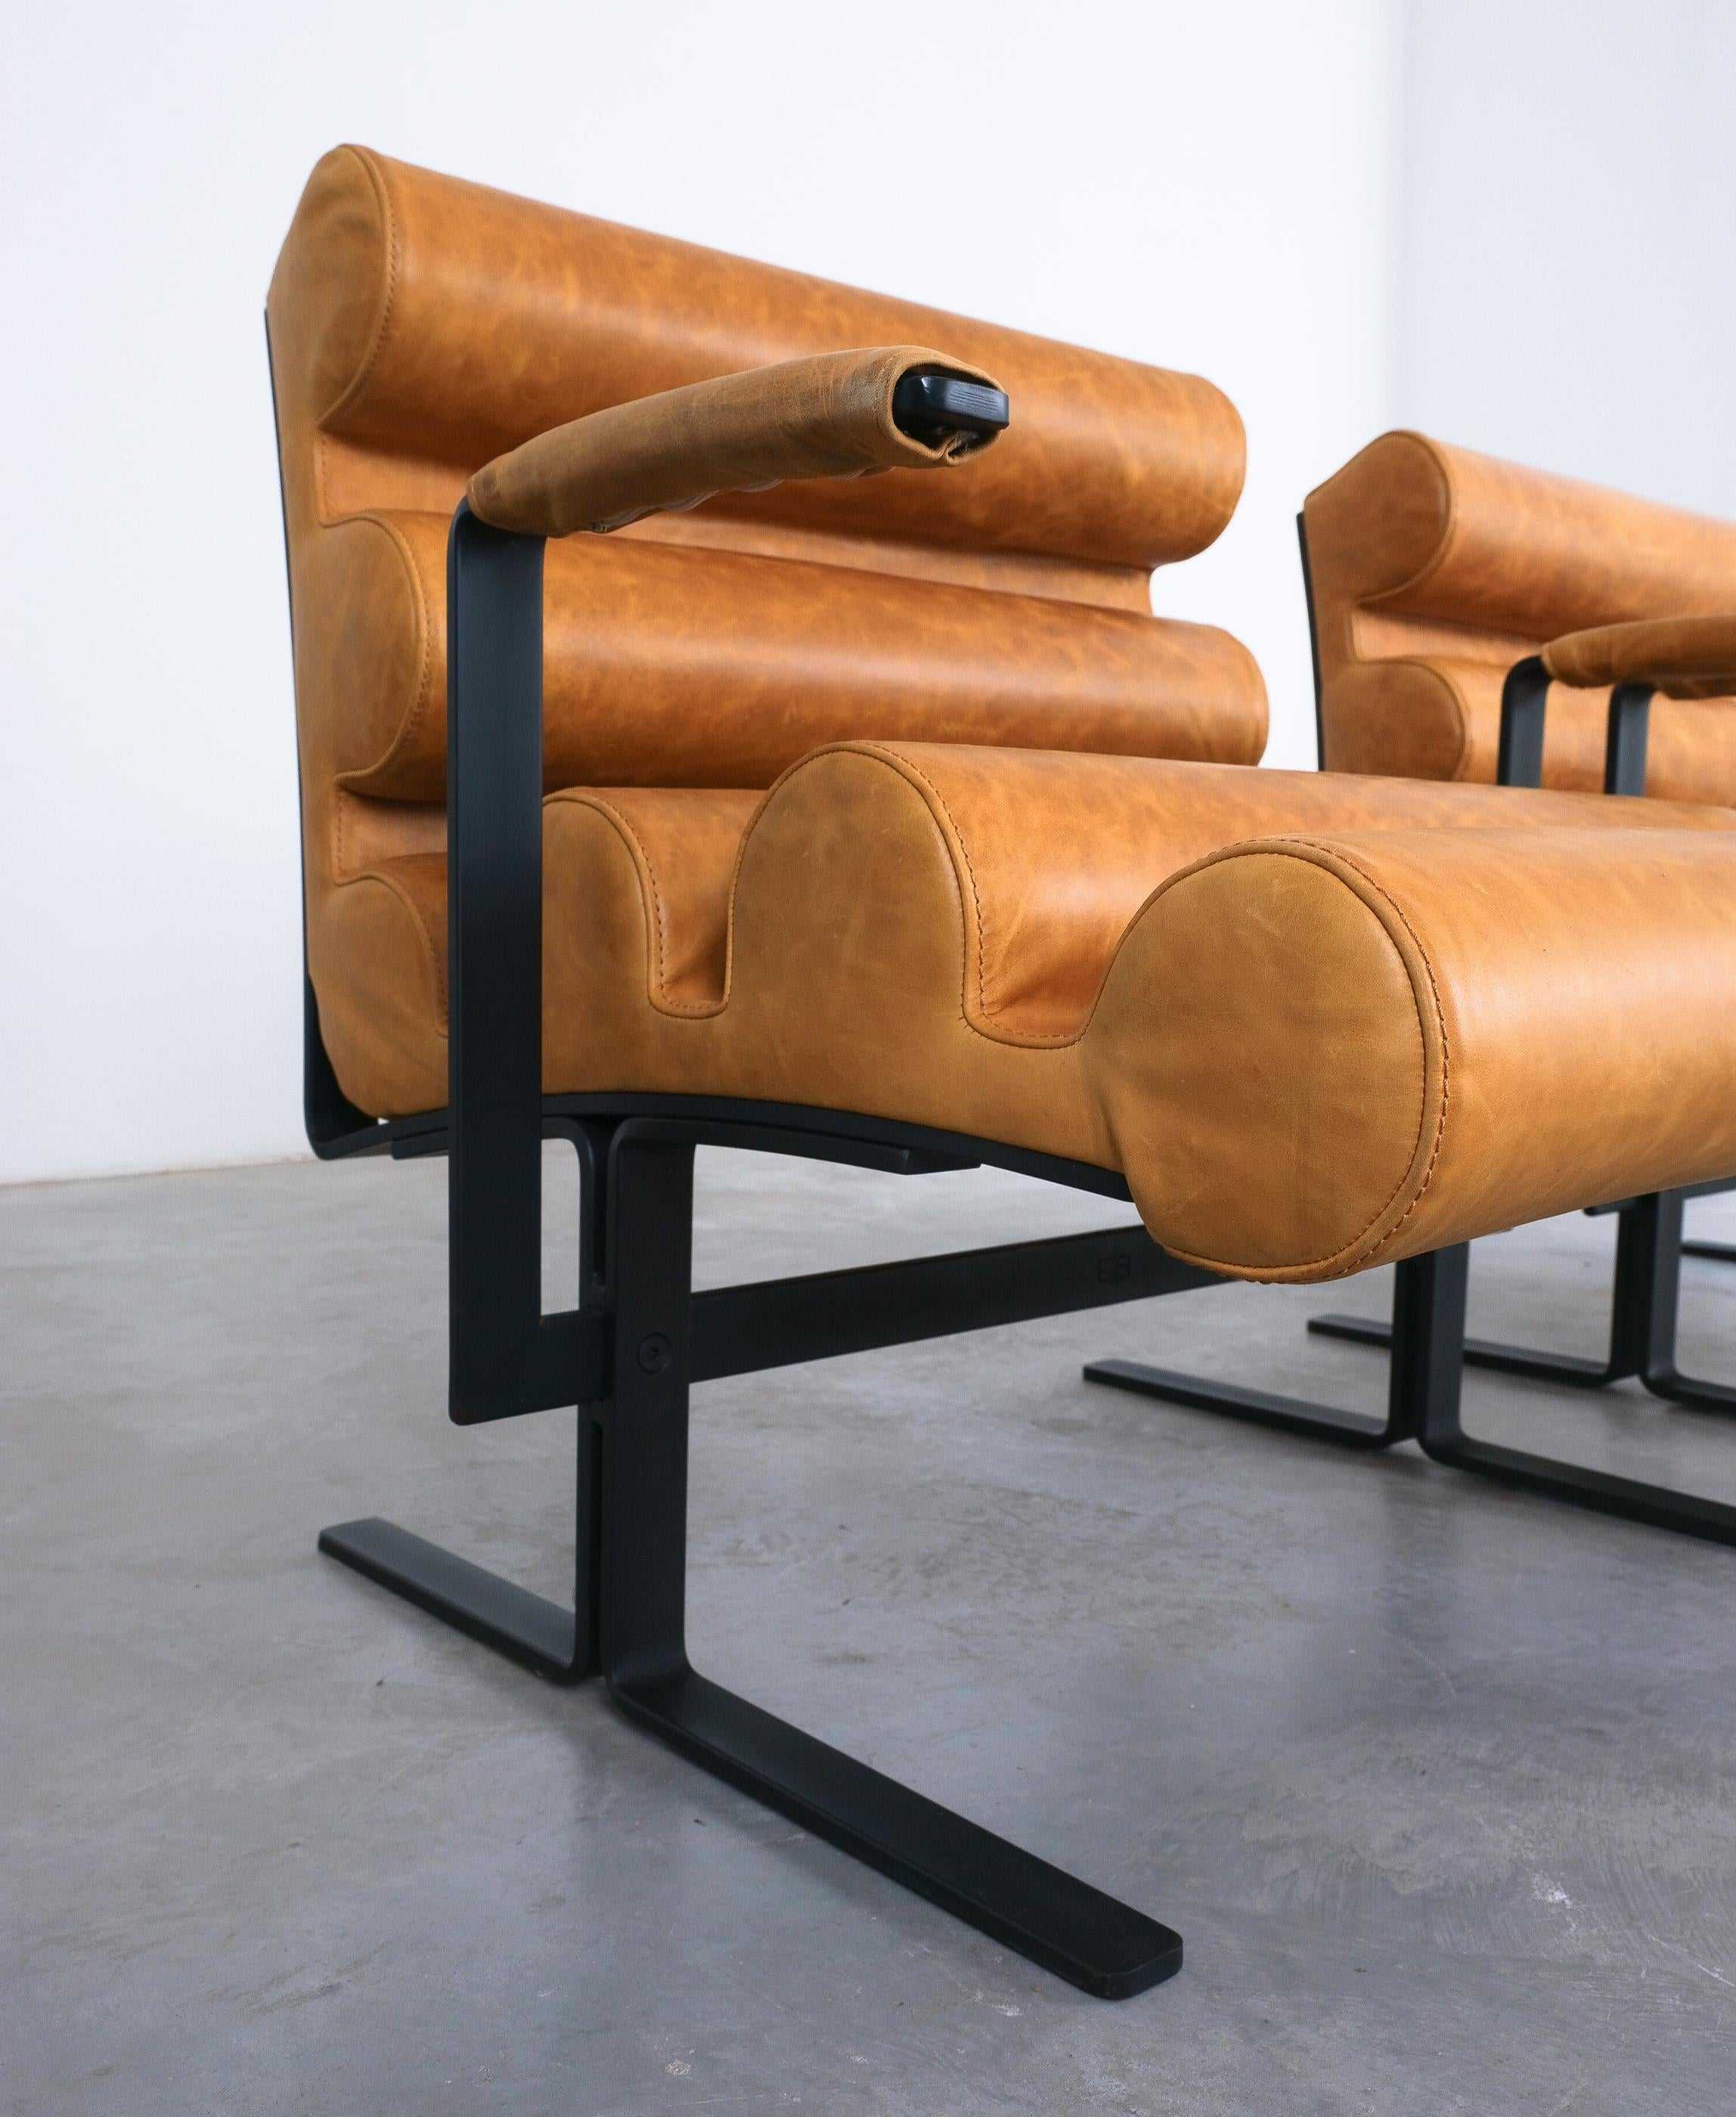 Joe Colombo For Sormani Roll Brown Leather Spring Steel Armchair Pair (2) , 1962 For Sale 6